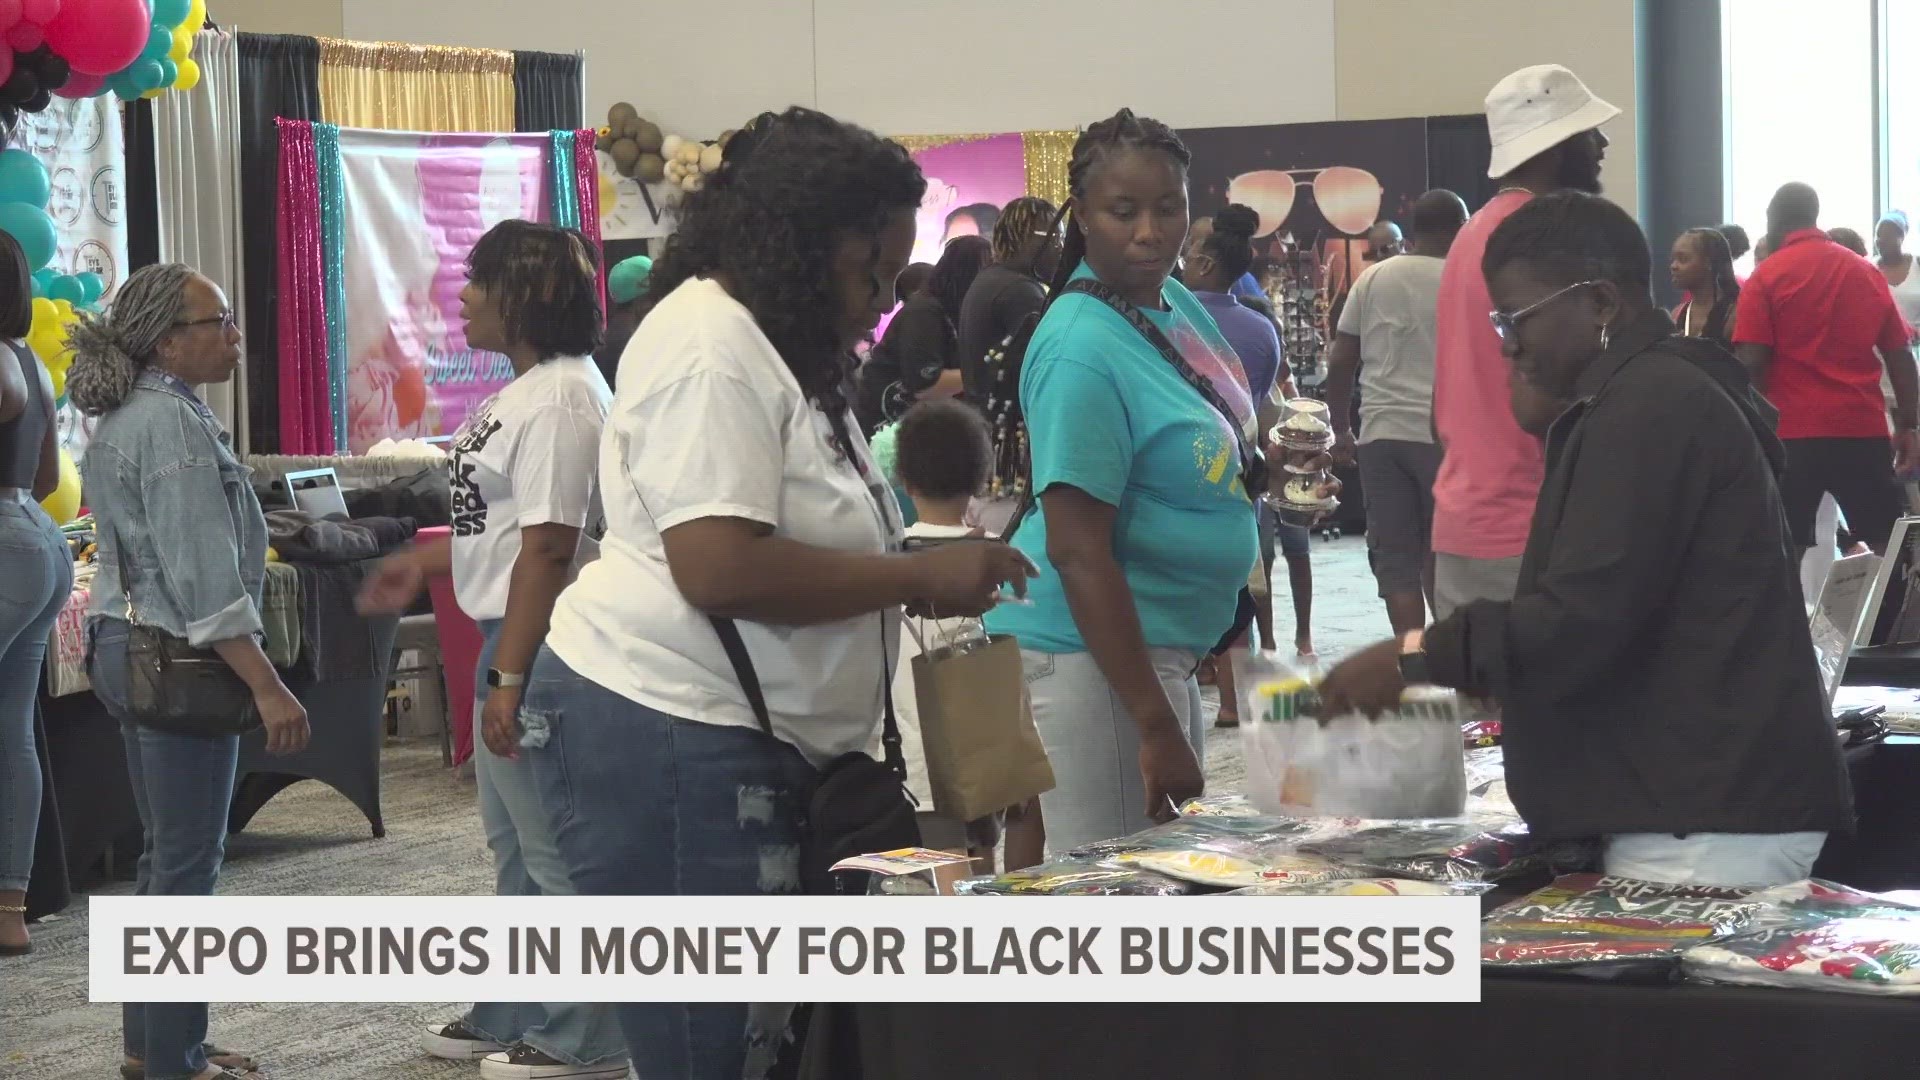 The expo, which happens every Juneteenth weekend, brought in around $970 for each participating business in 2022.